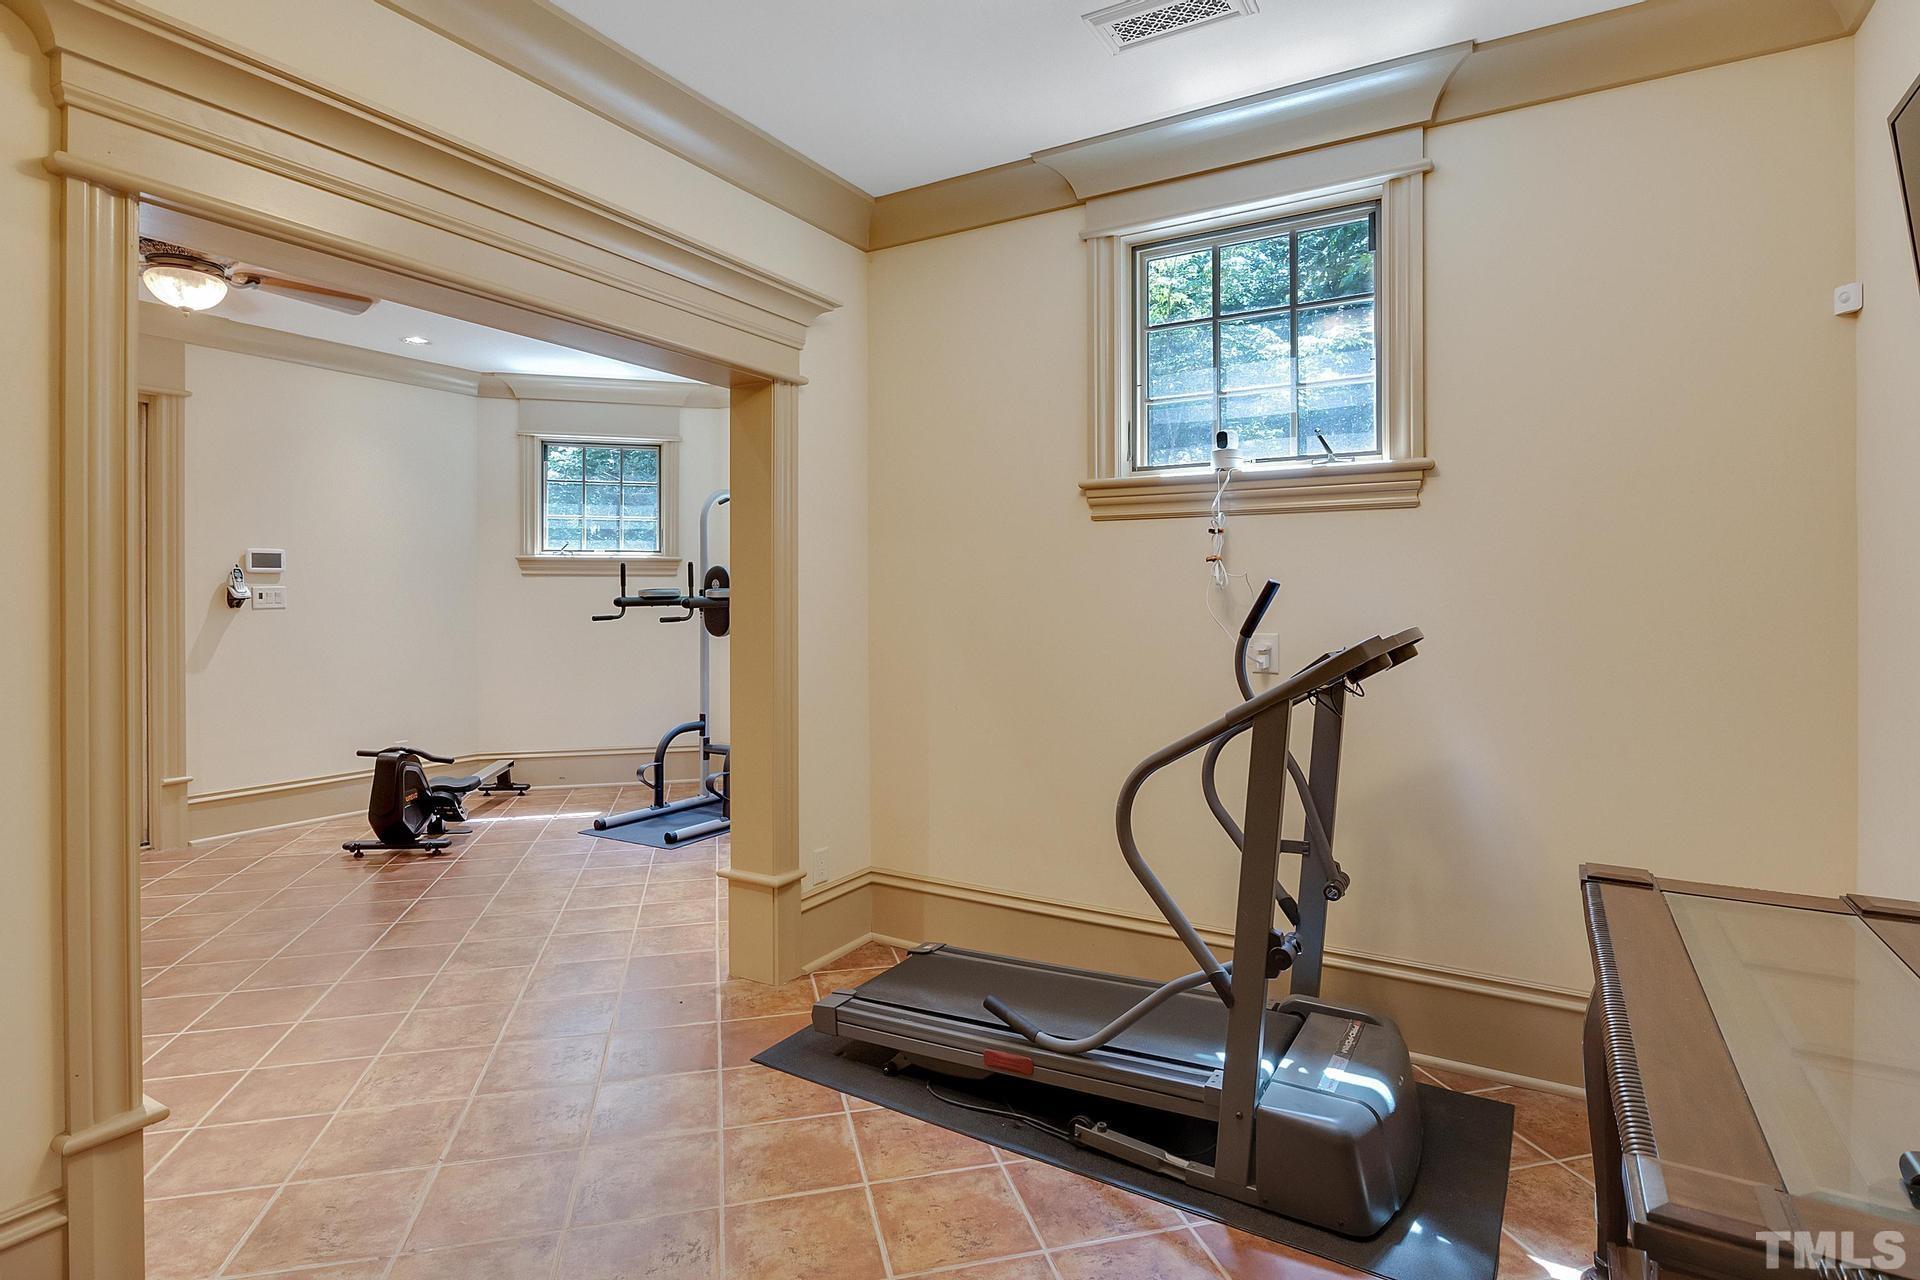 The basement fitness room has its own covered patio leading to he backyard.